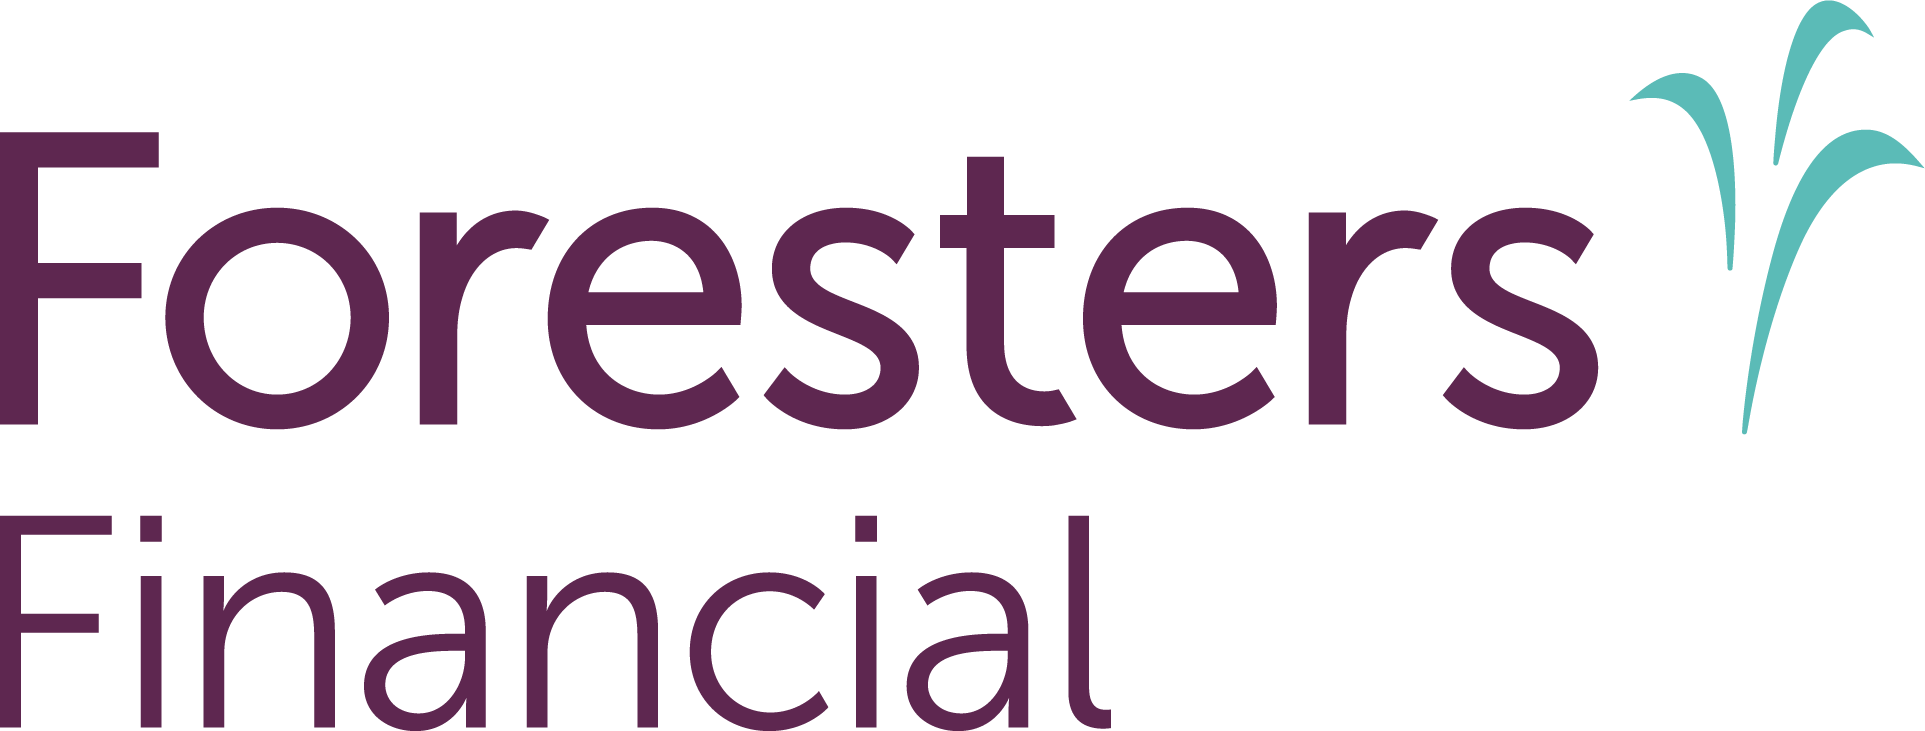 Foresters Financial Logo